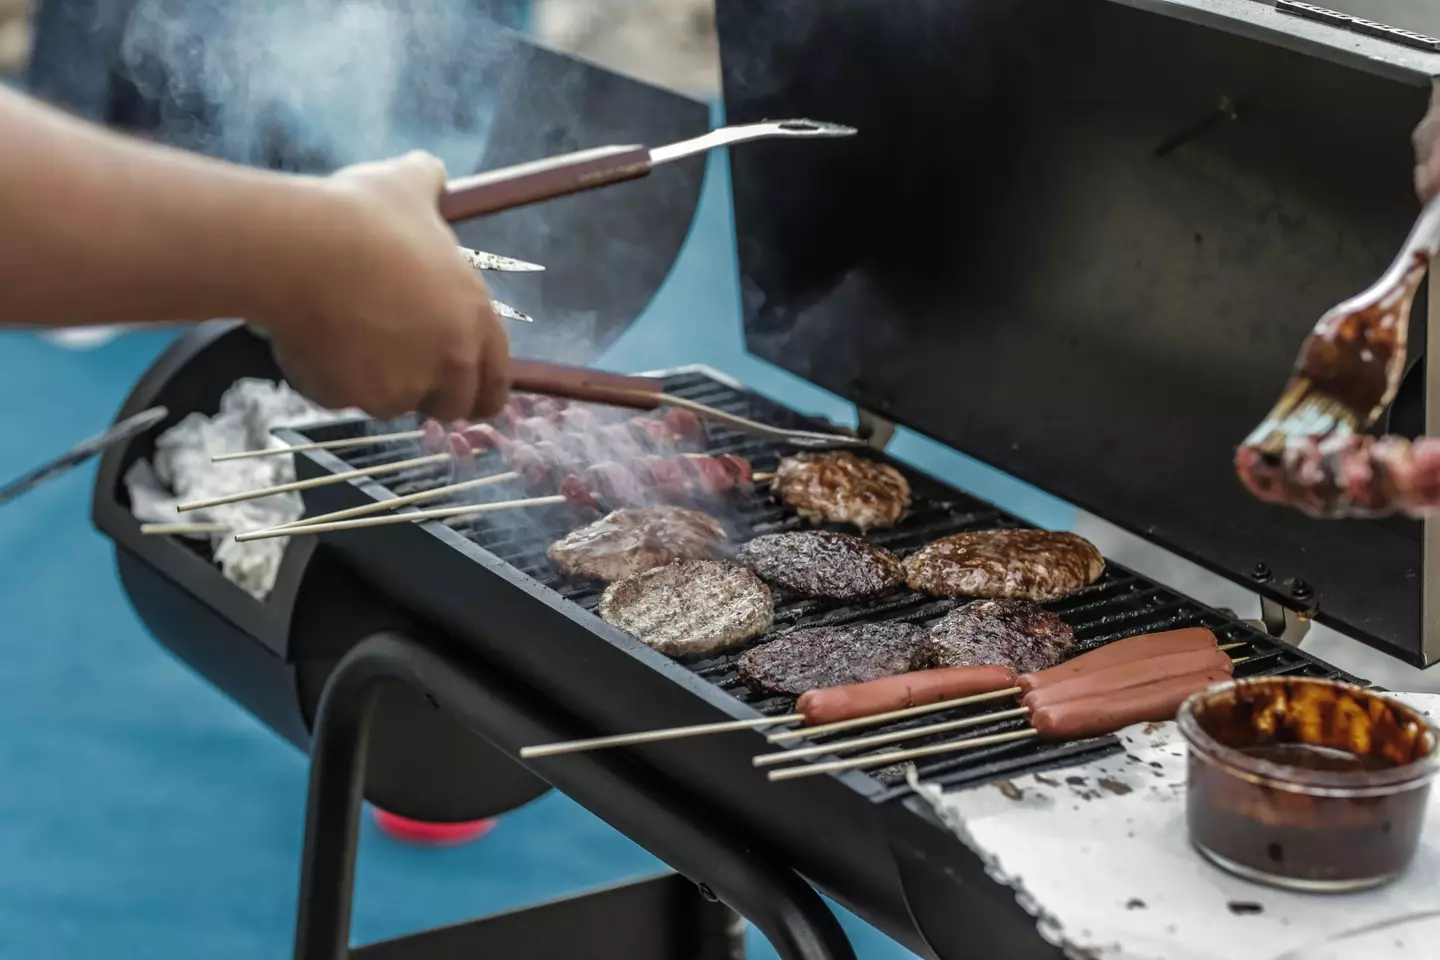 The woman says her neighbour was less than impressed after she hosted a barbecue.